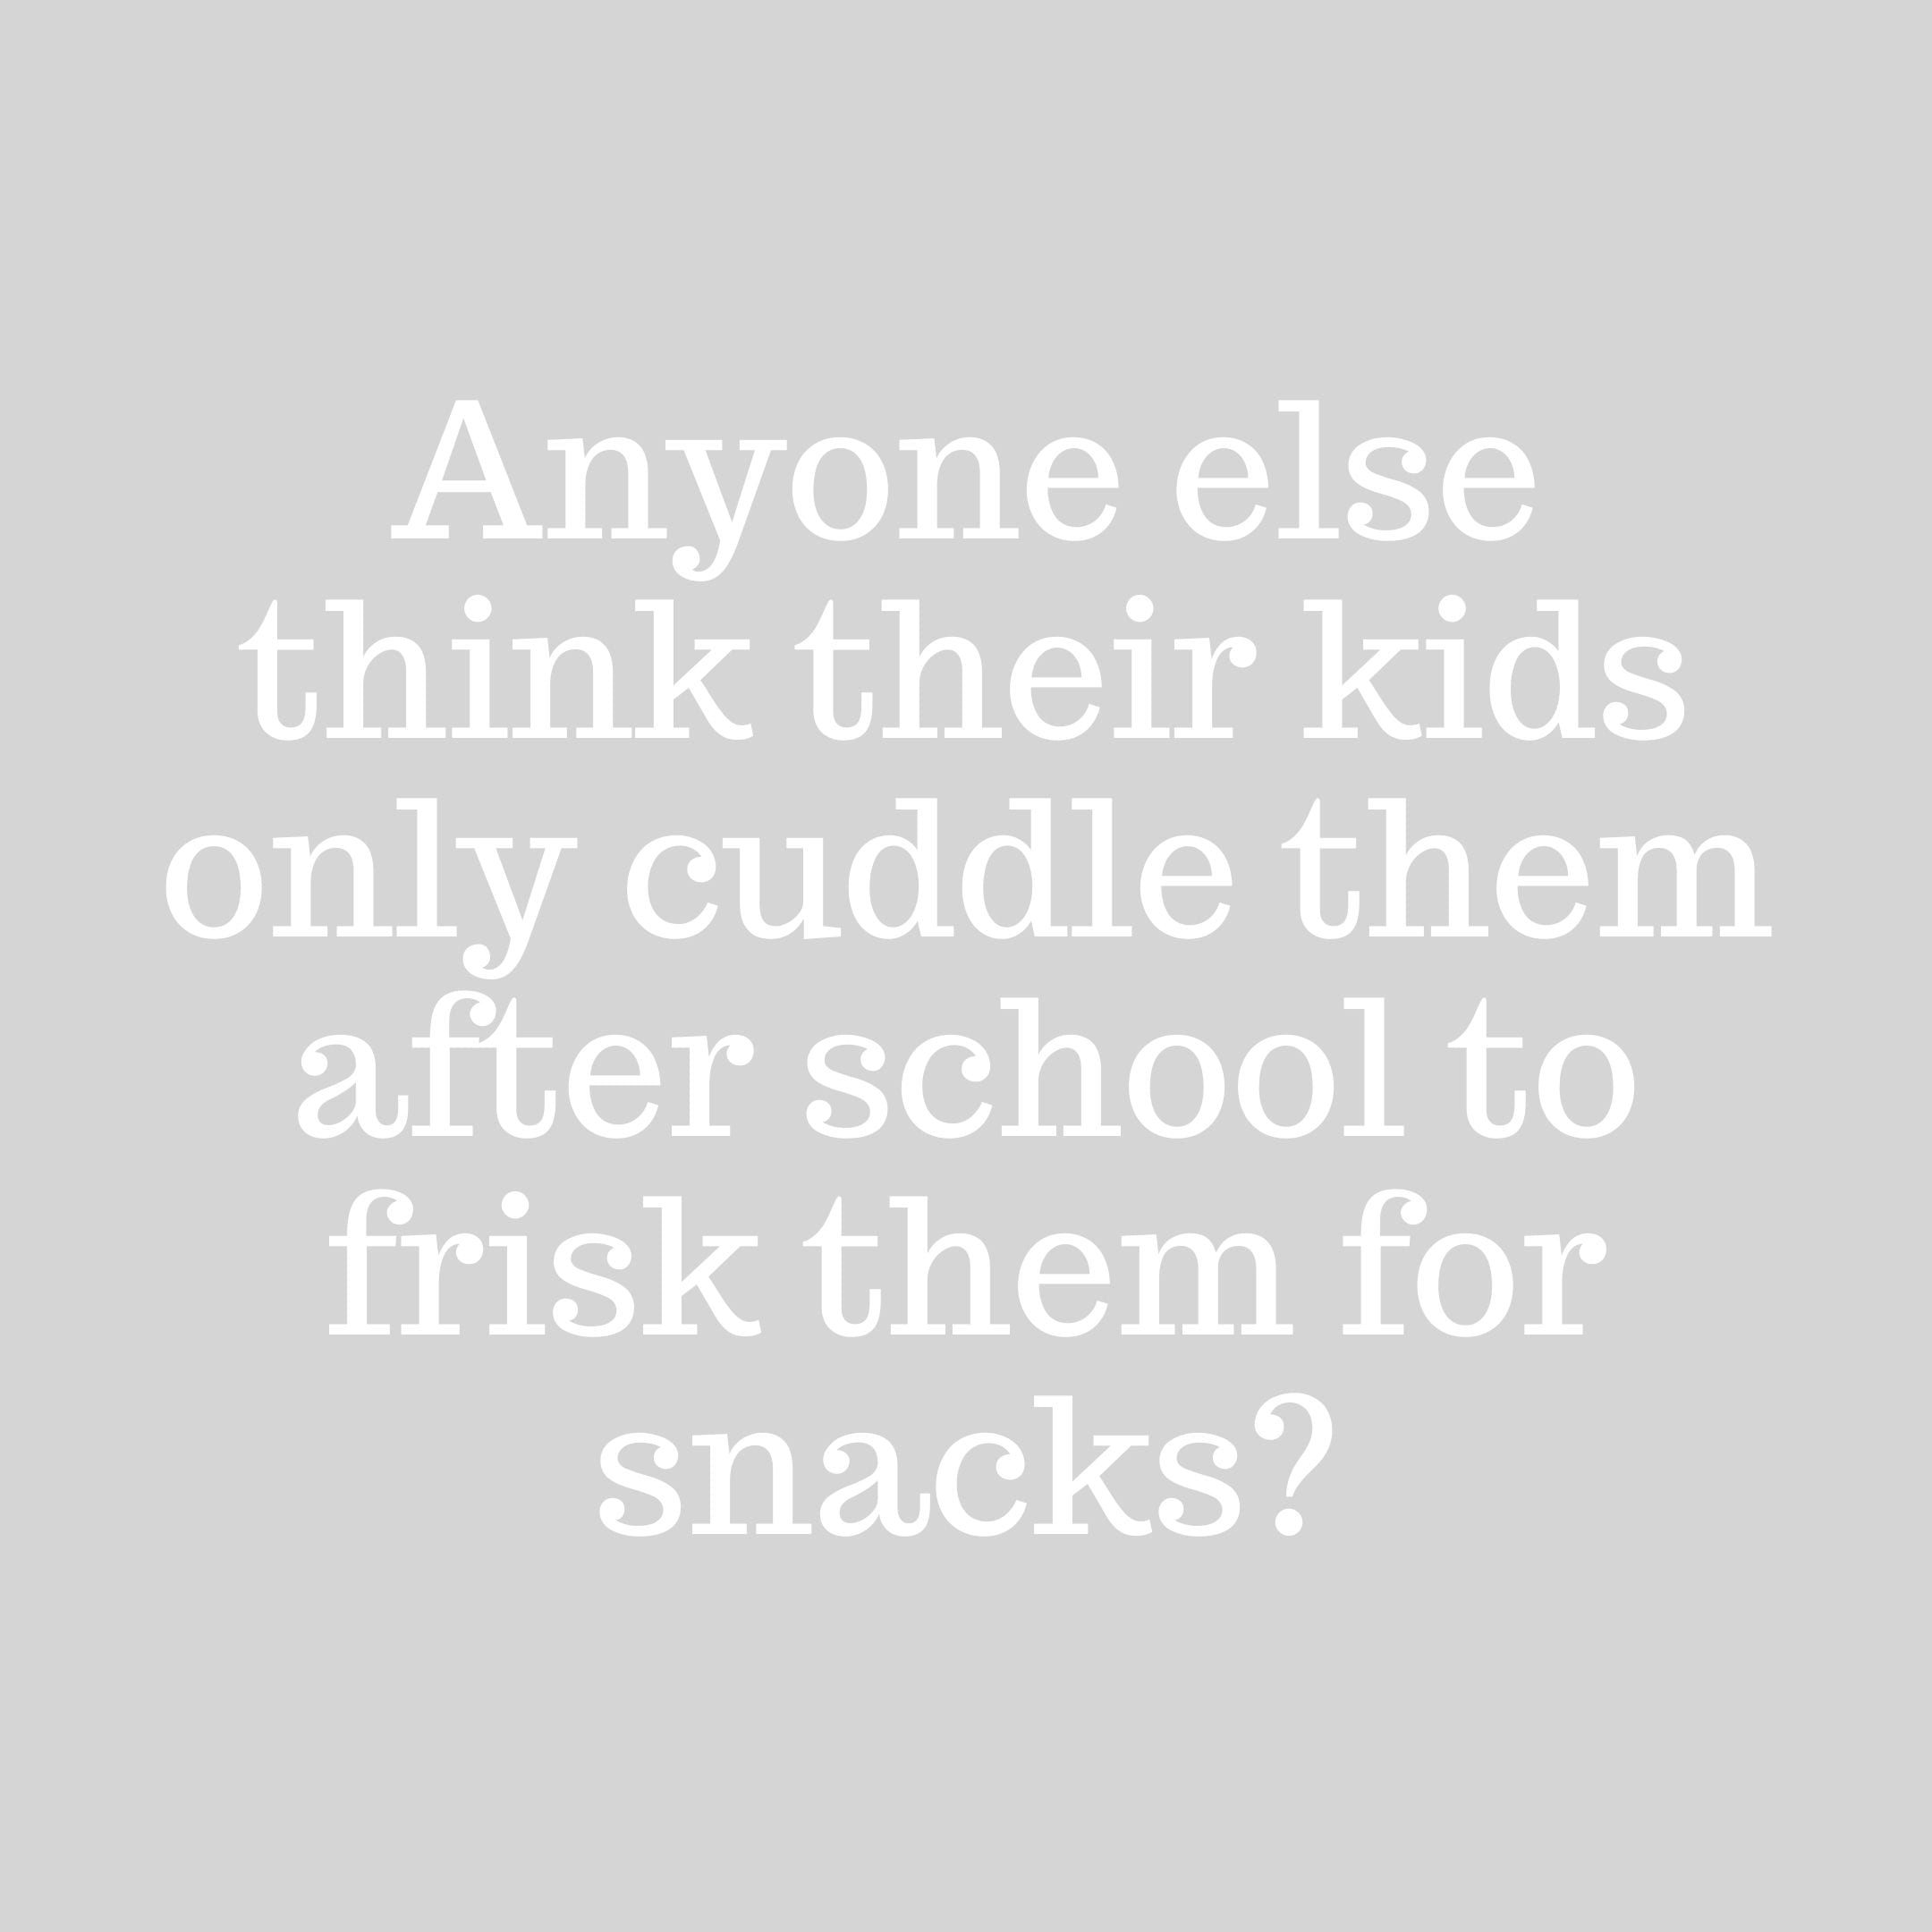 After school snacks ideas quote